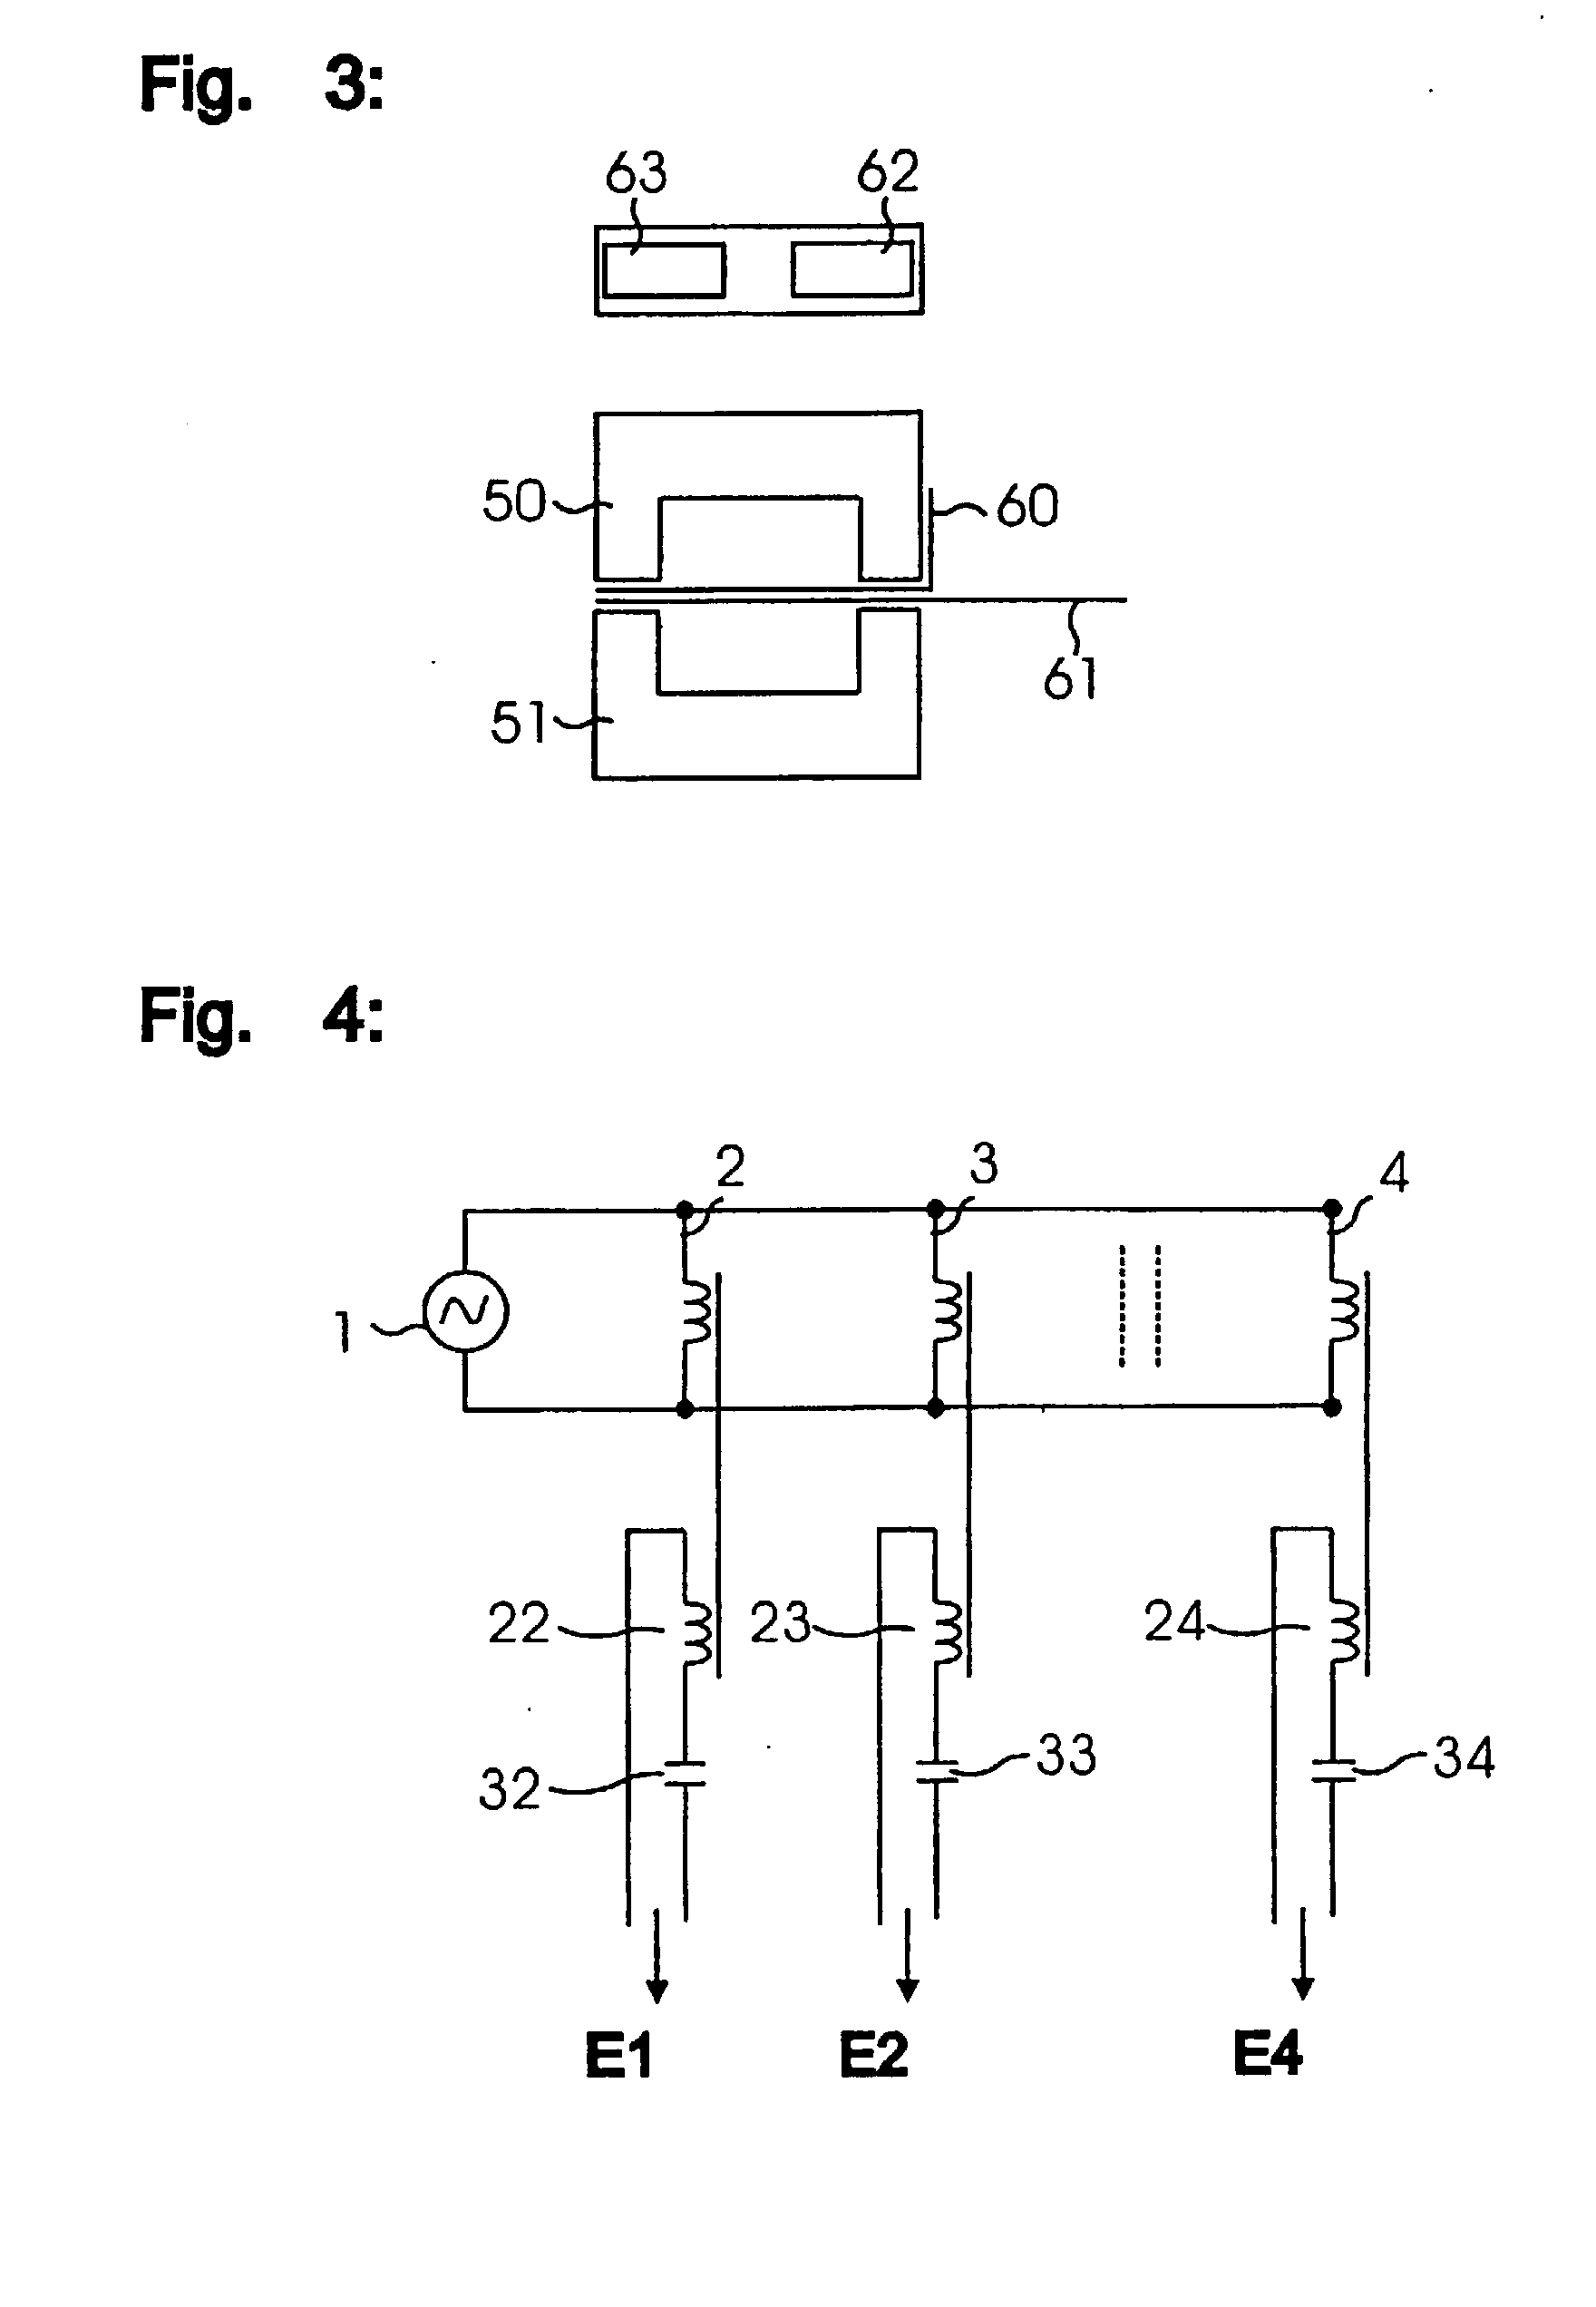 Array for the contact-less transmission of electrical signals or energy